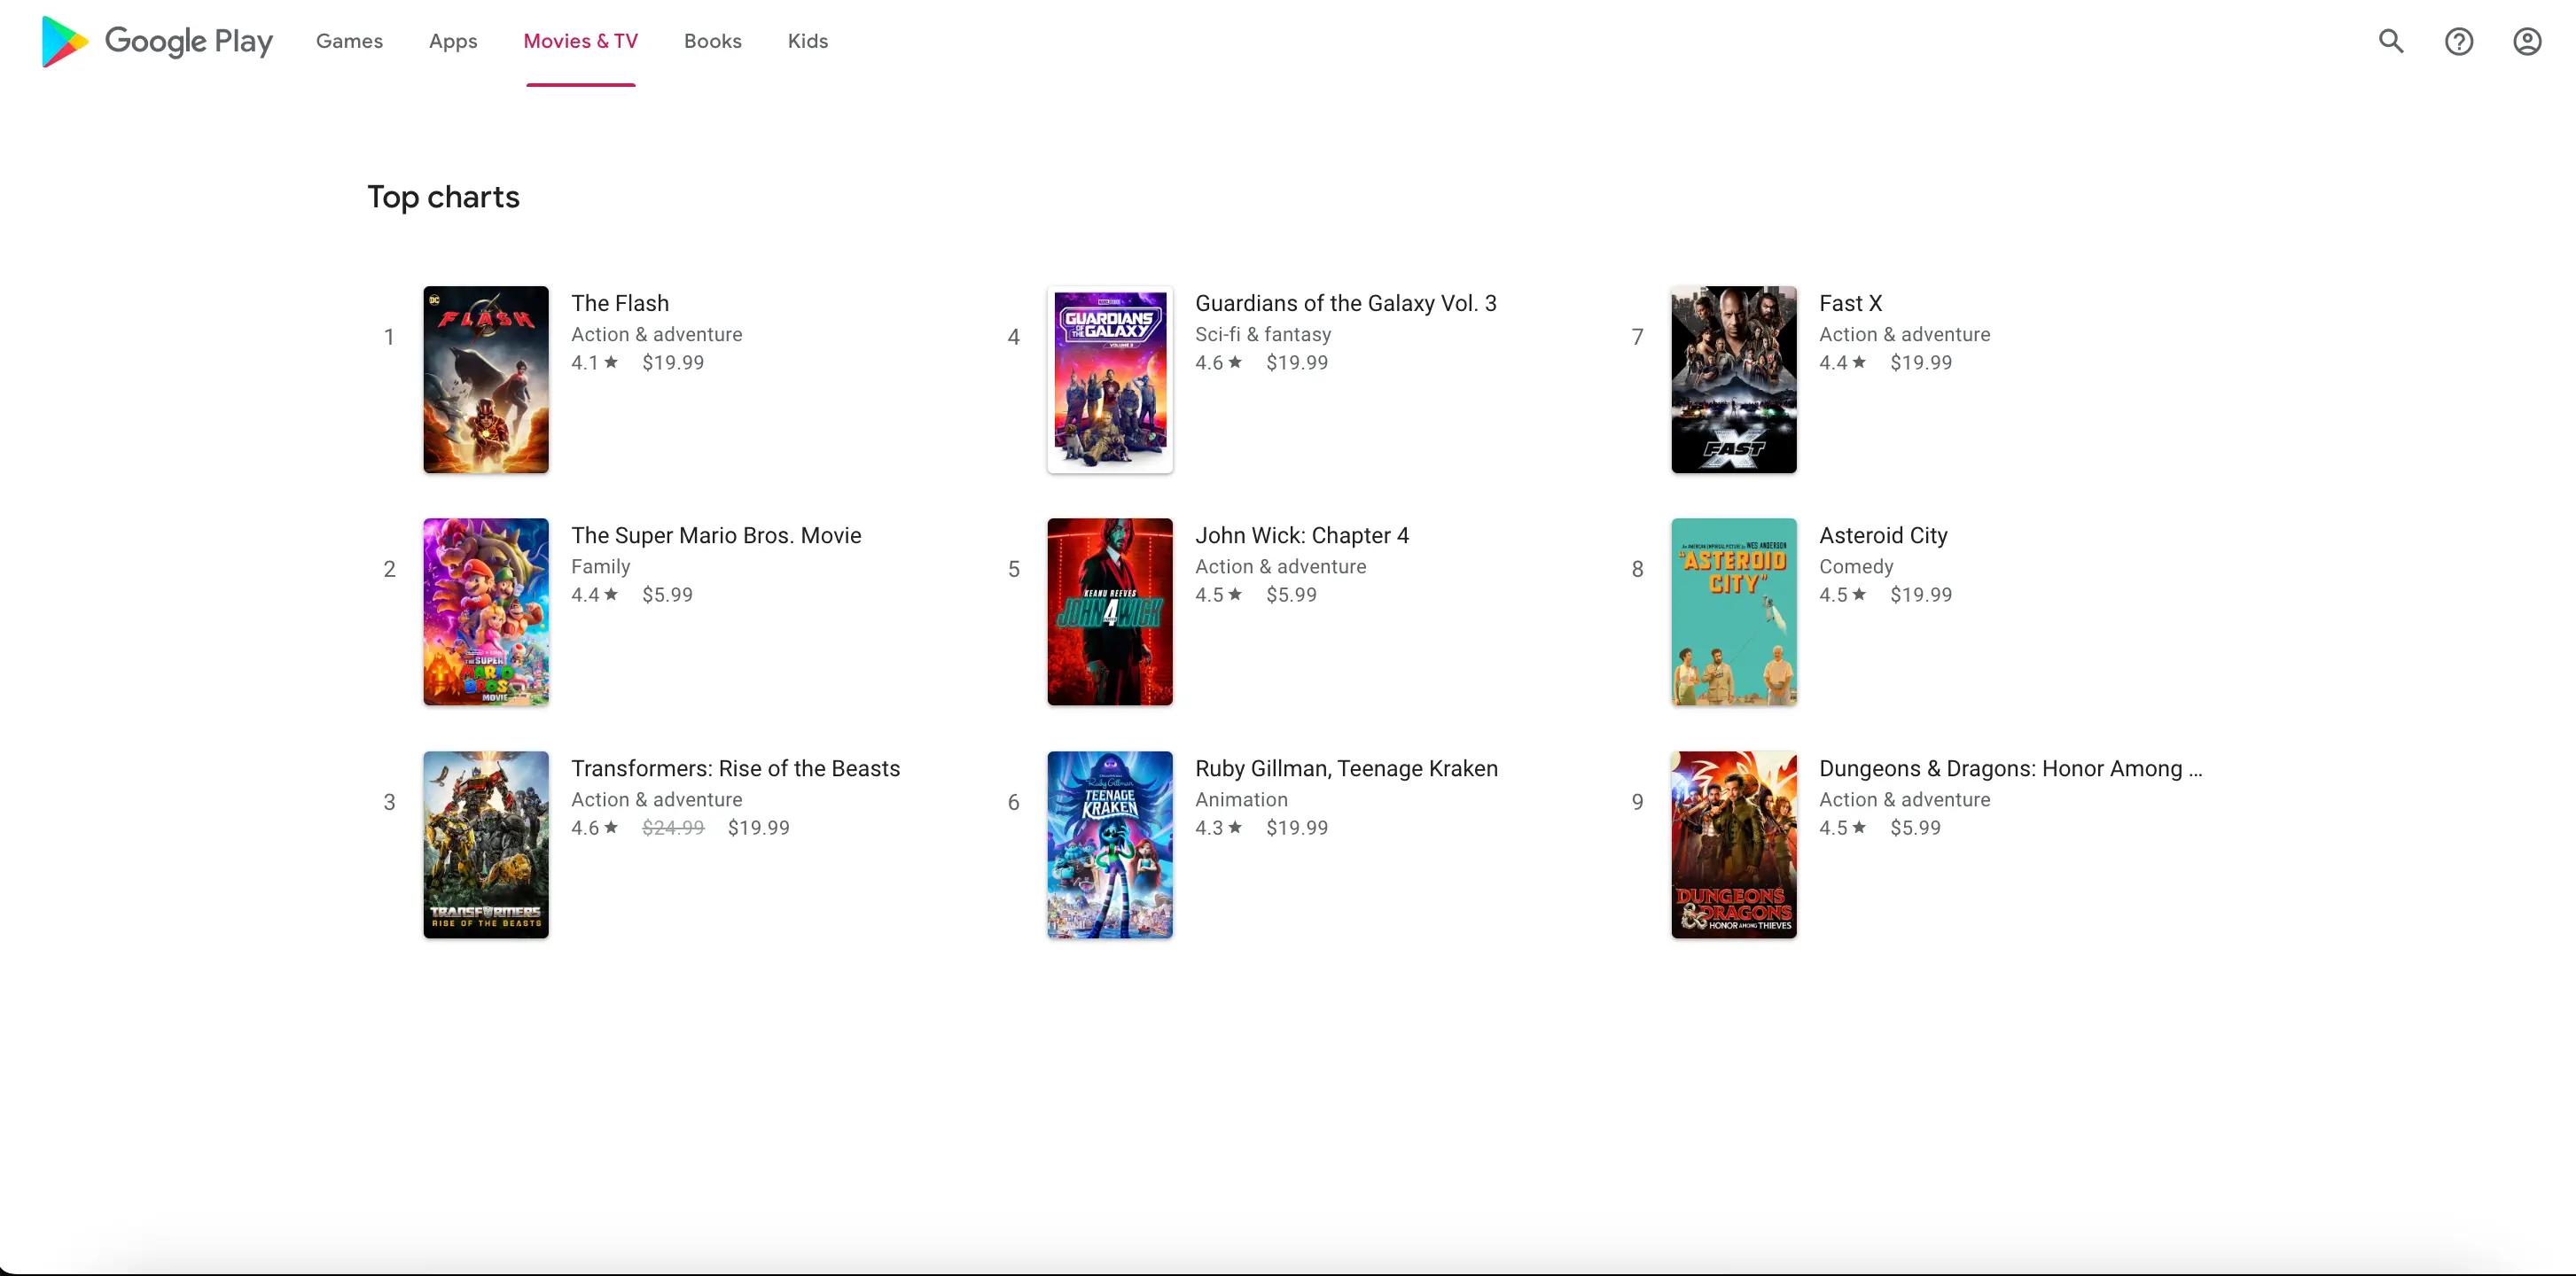 Top Charts results overview for Google Play Movies with chart(Plain Search)